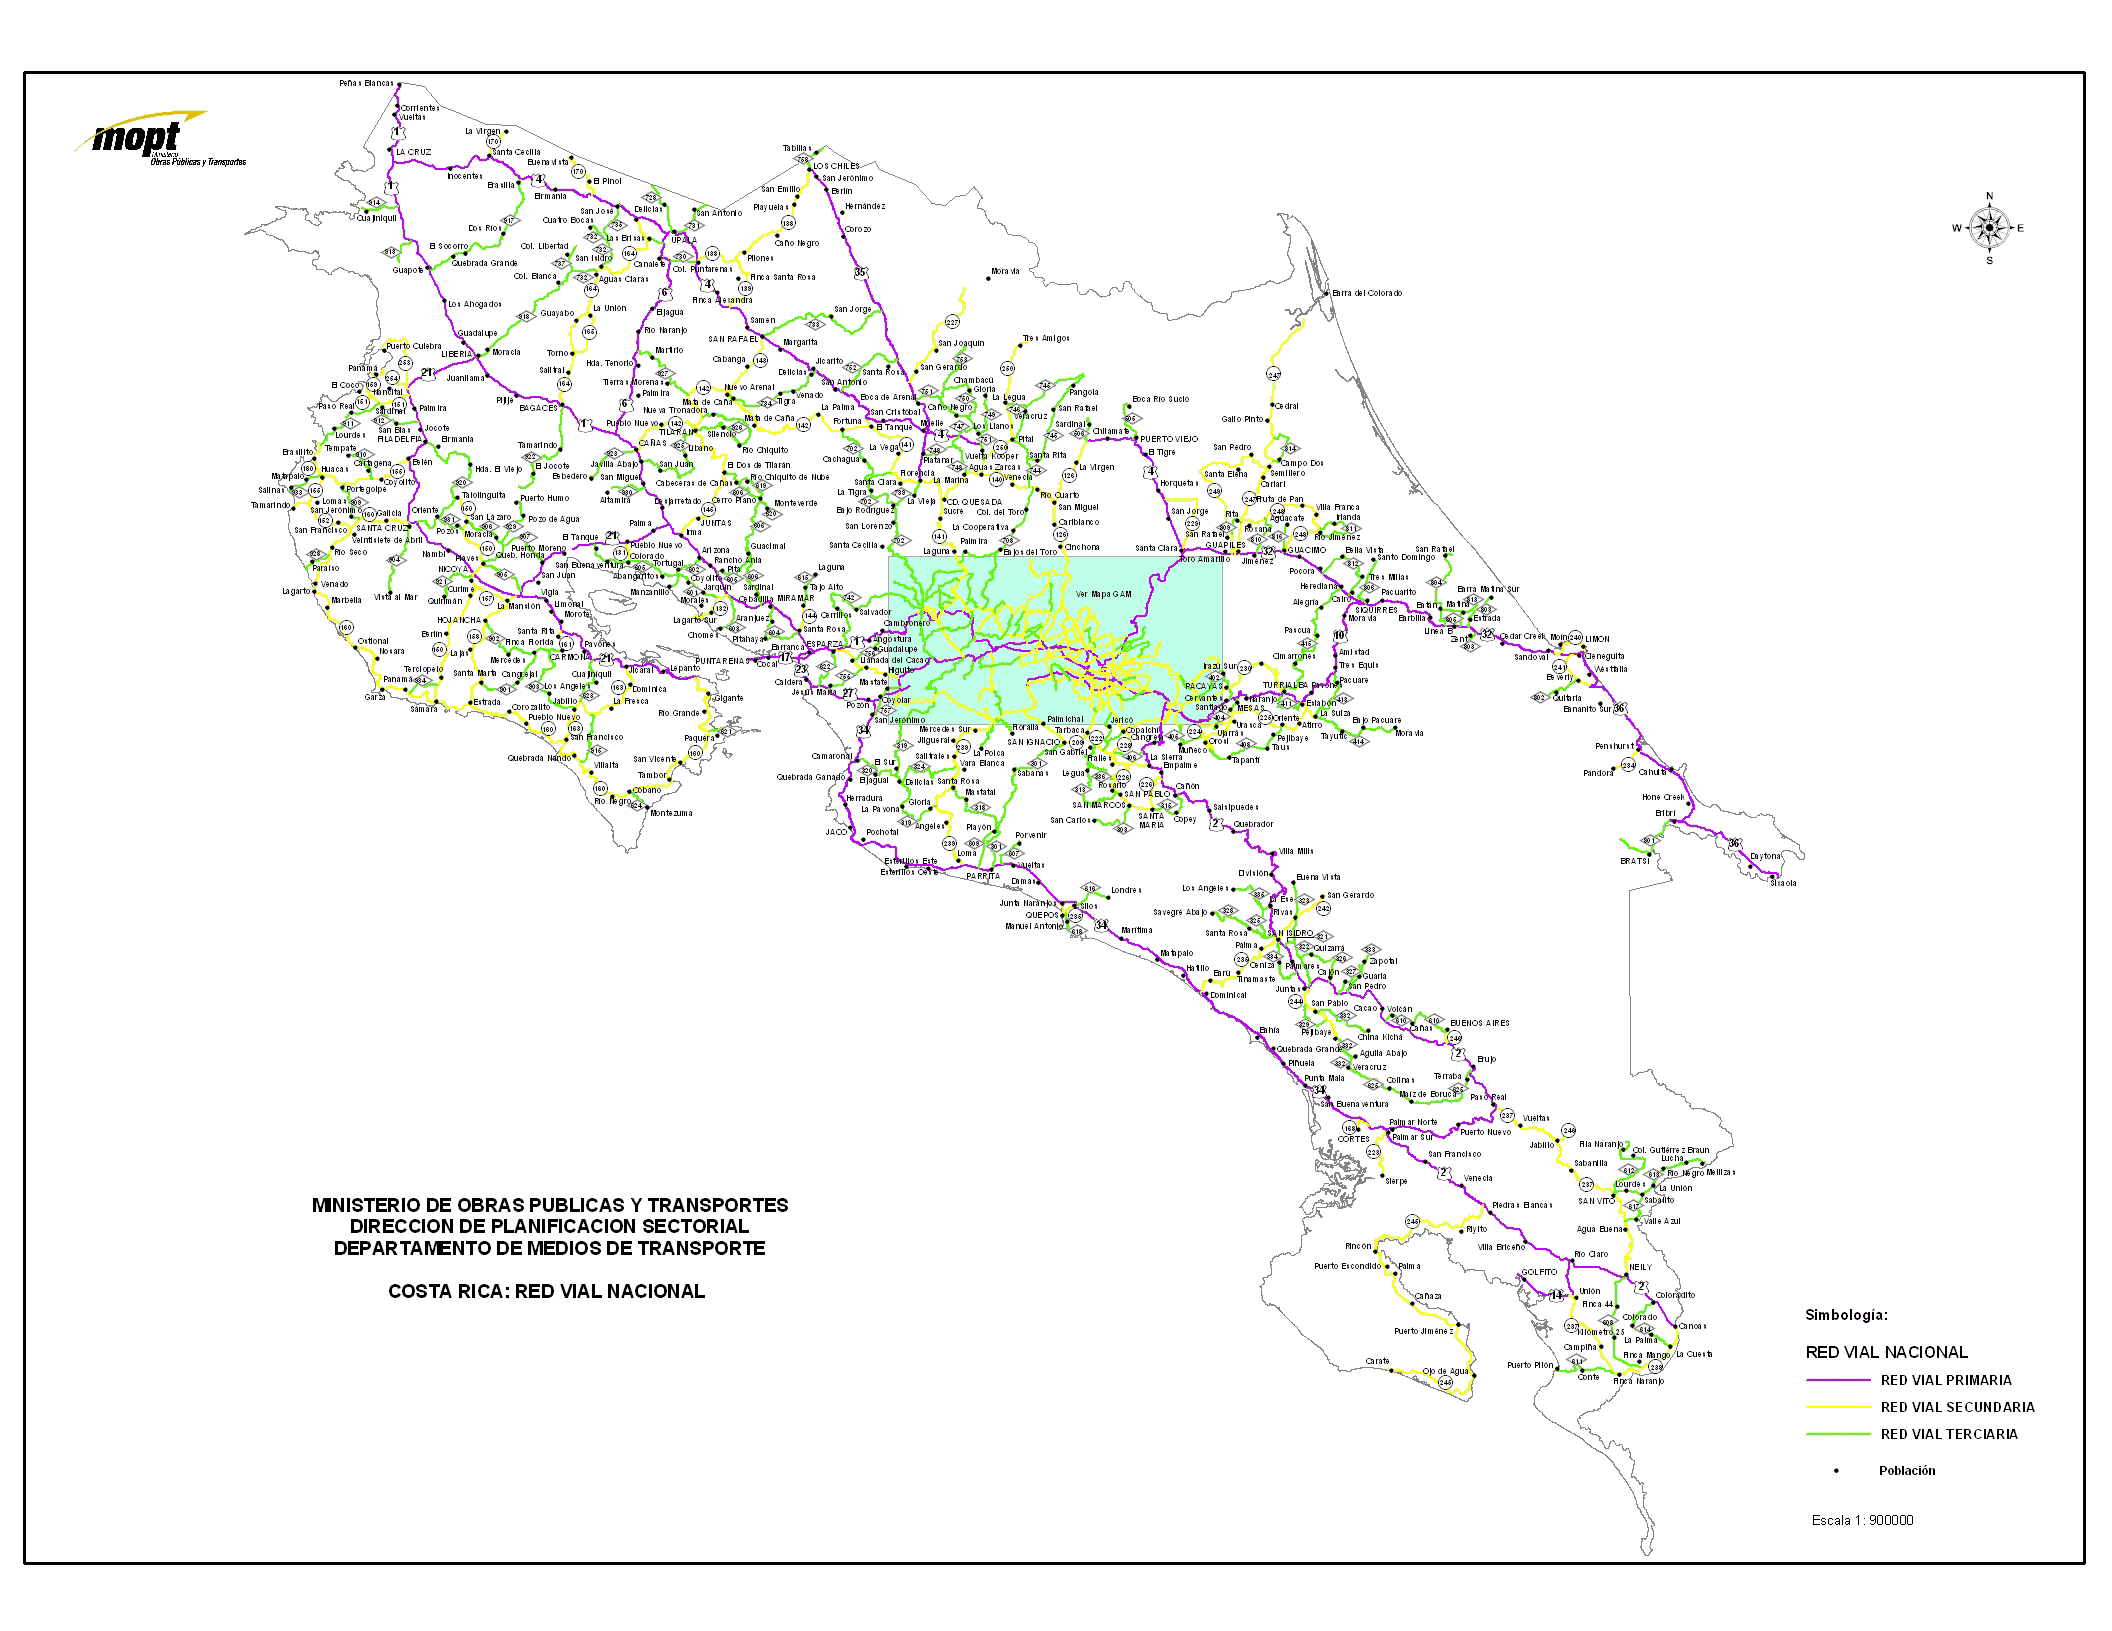 Costa Rica National Road Network Map